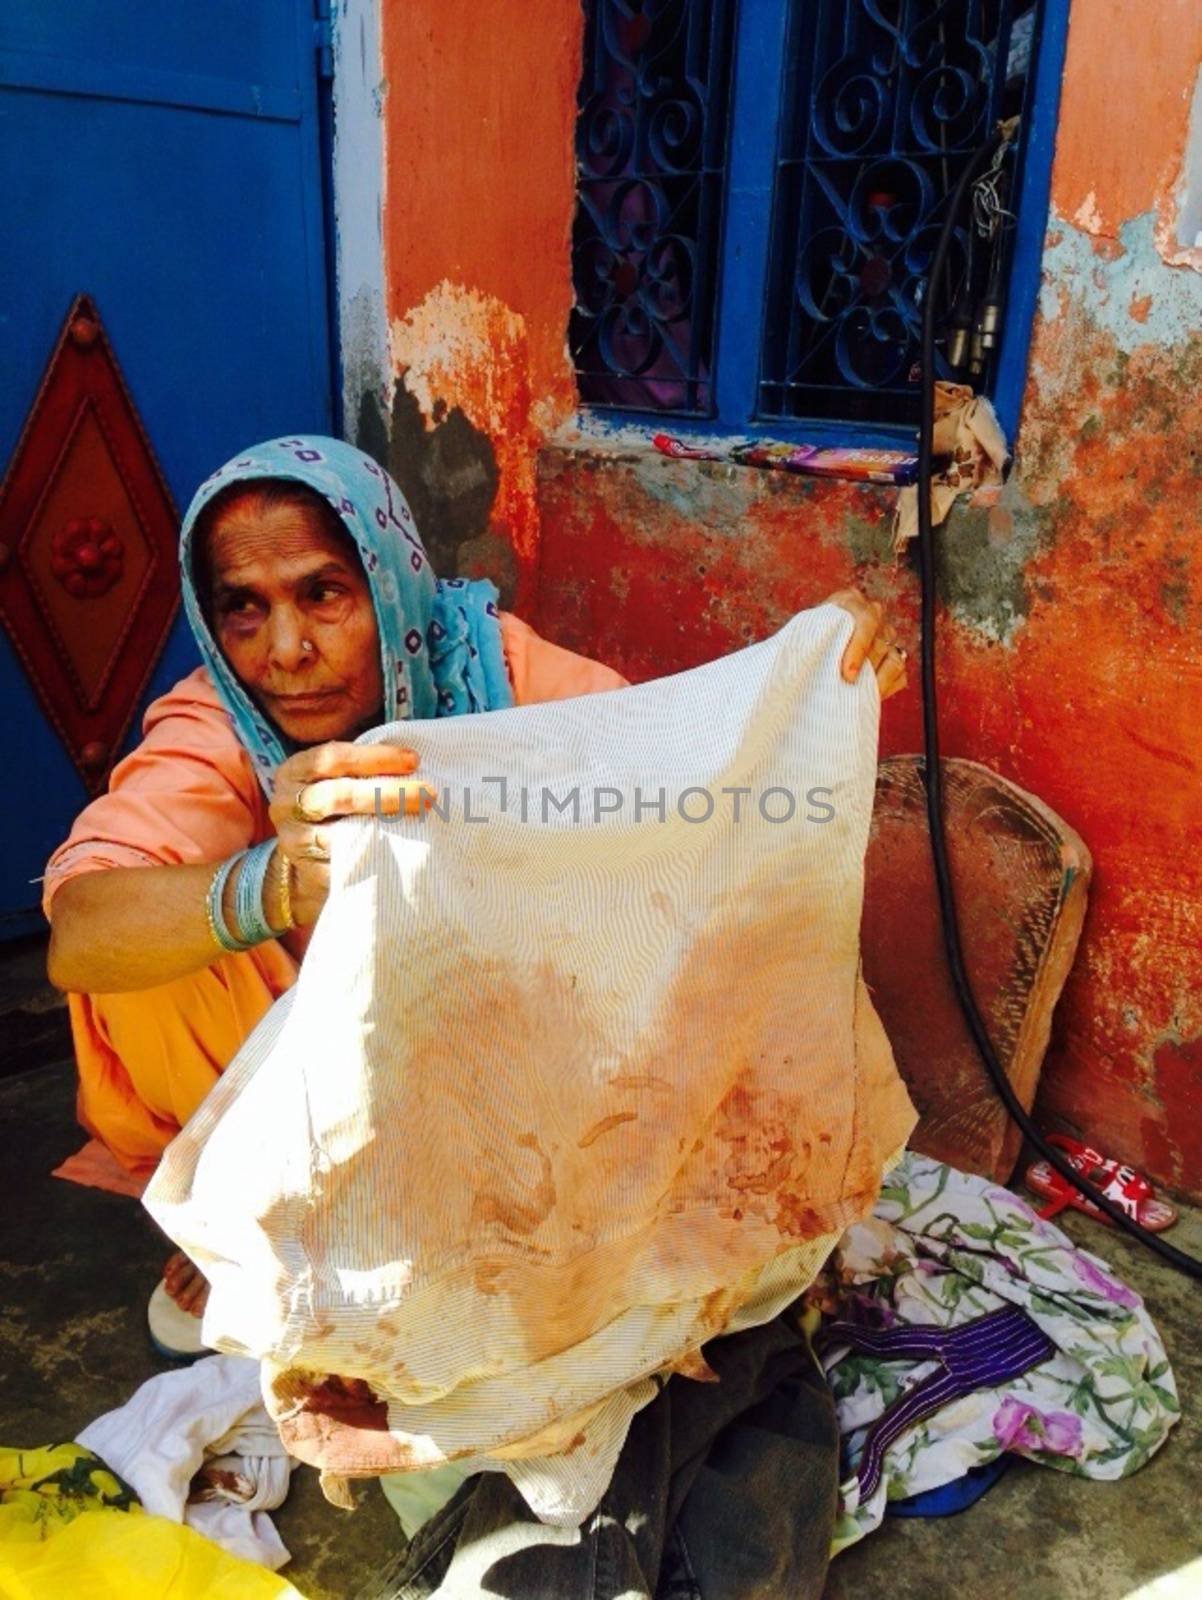 INDIA, Dadri: Asgara Begum, age 70, holds the blood soaked shirt that her son Mohammad Ikhlaq, age 52, was wearing when he was killed by a mob over rumors that the family had been storing and consuming beef at their home in Dadri, Uttar Pradesh, India on October 1, 2015. Her 22-year-old son Danish was also seriously injured in the attack and is battling for his life in a Noida hospital.  		